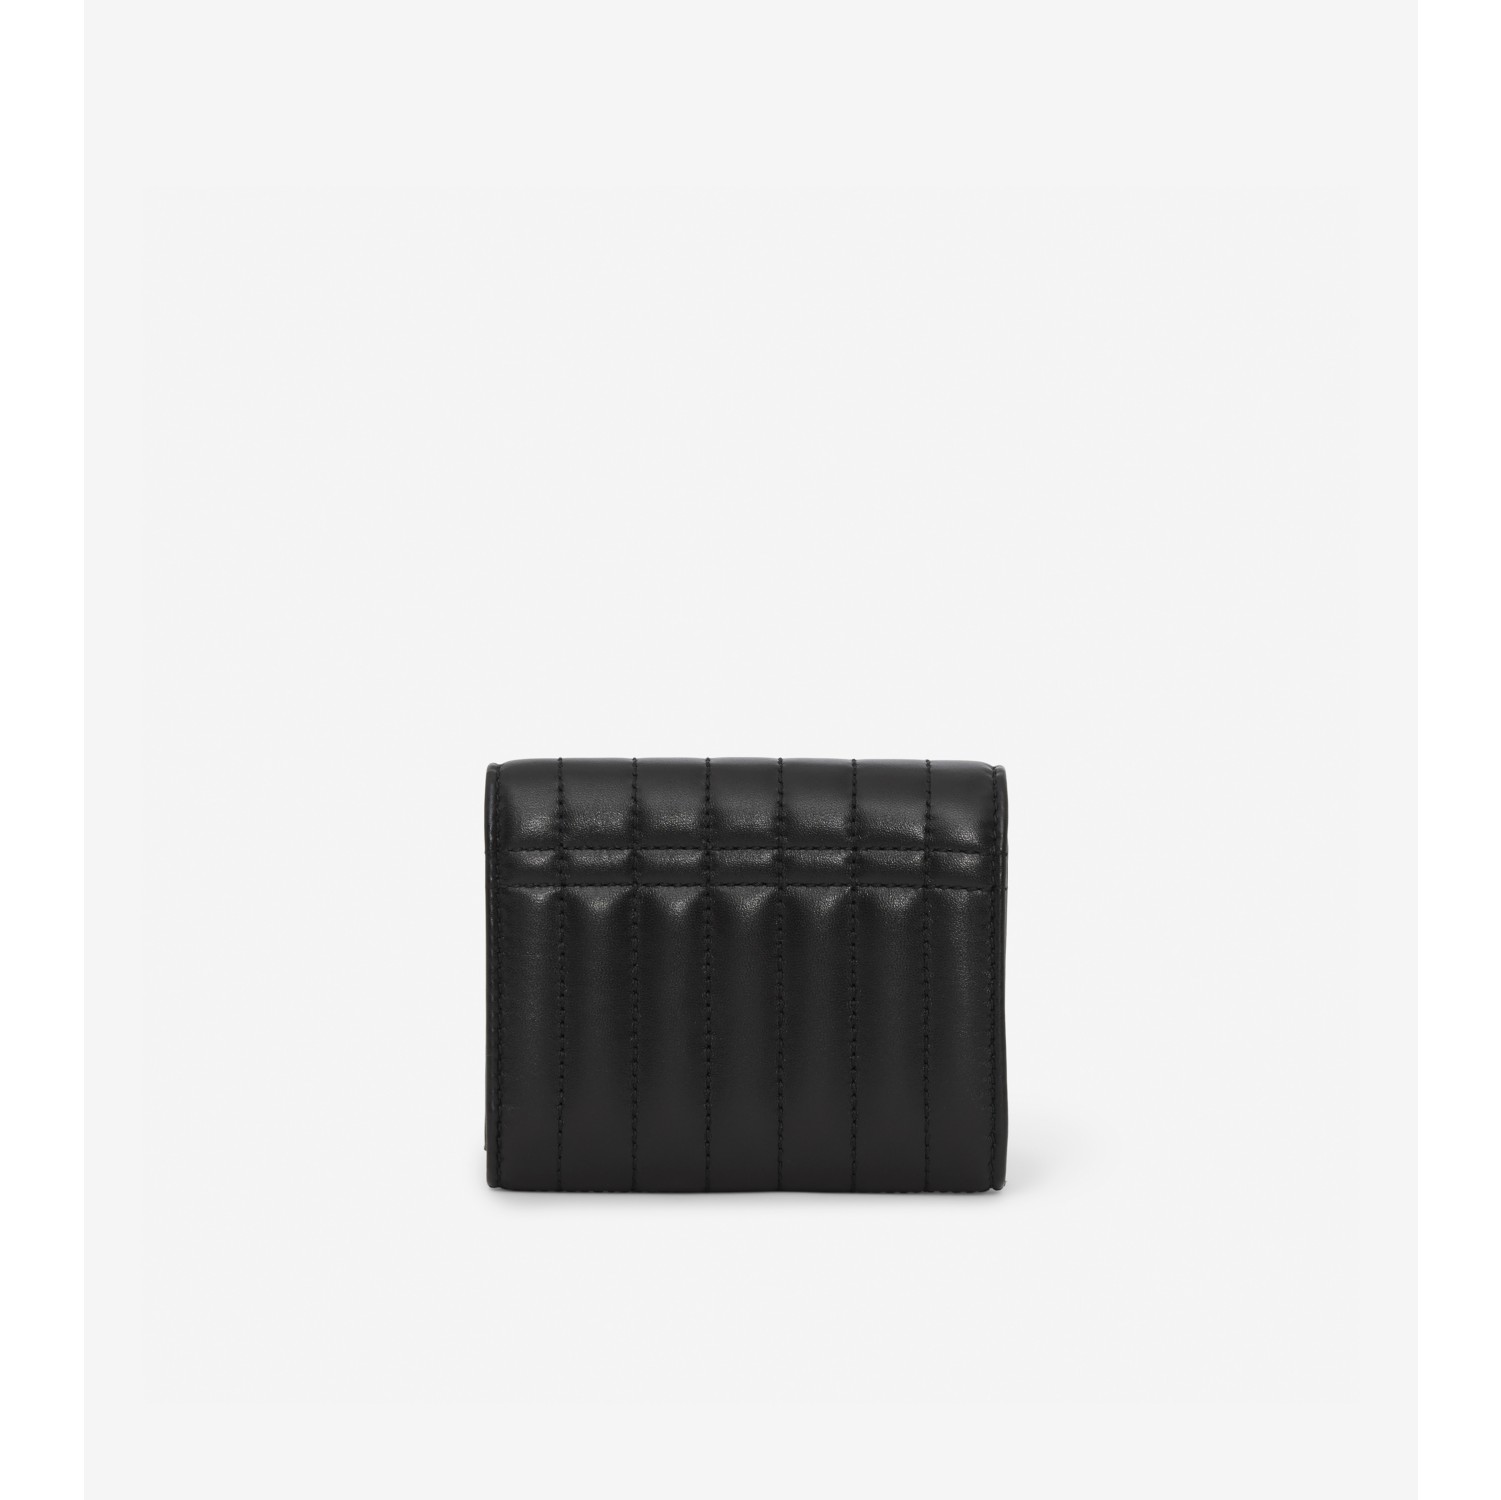 Saint Laurent Women's Compact 3-fold Quilted Leather Wallet